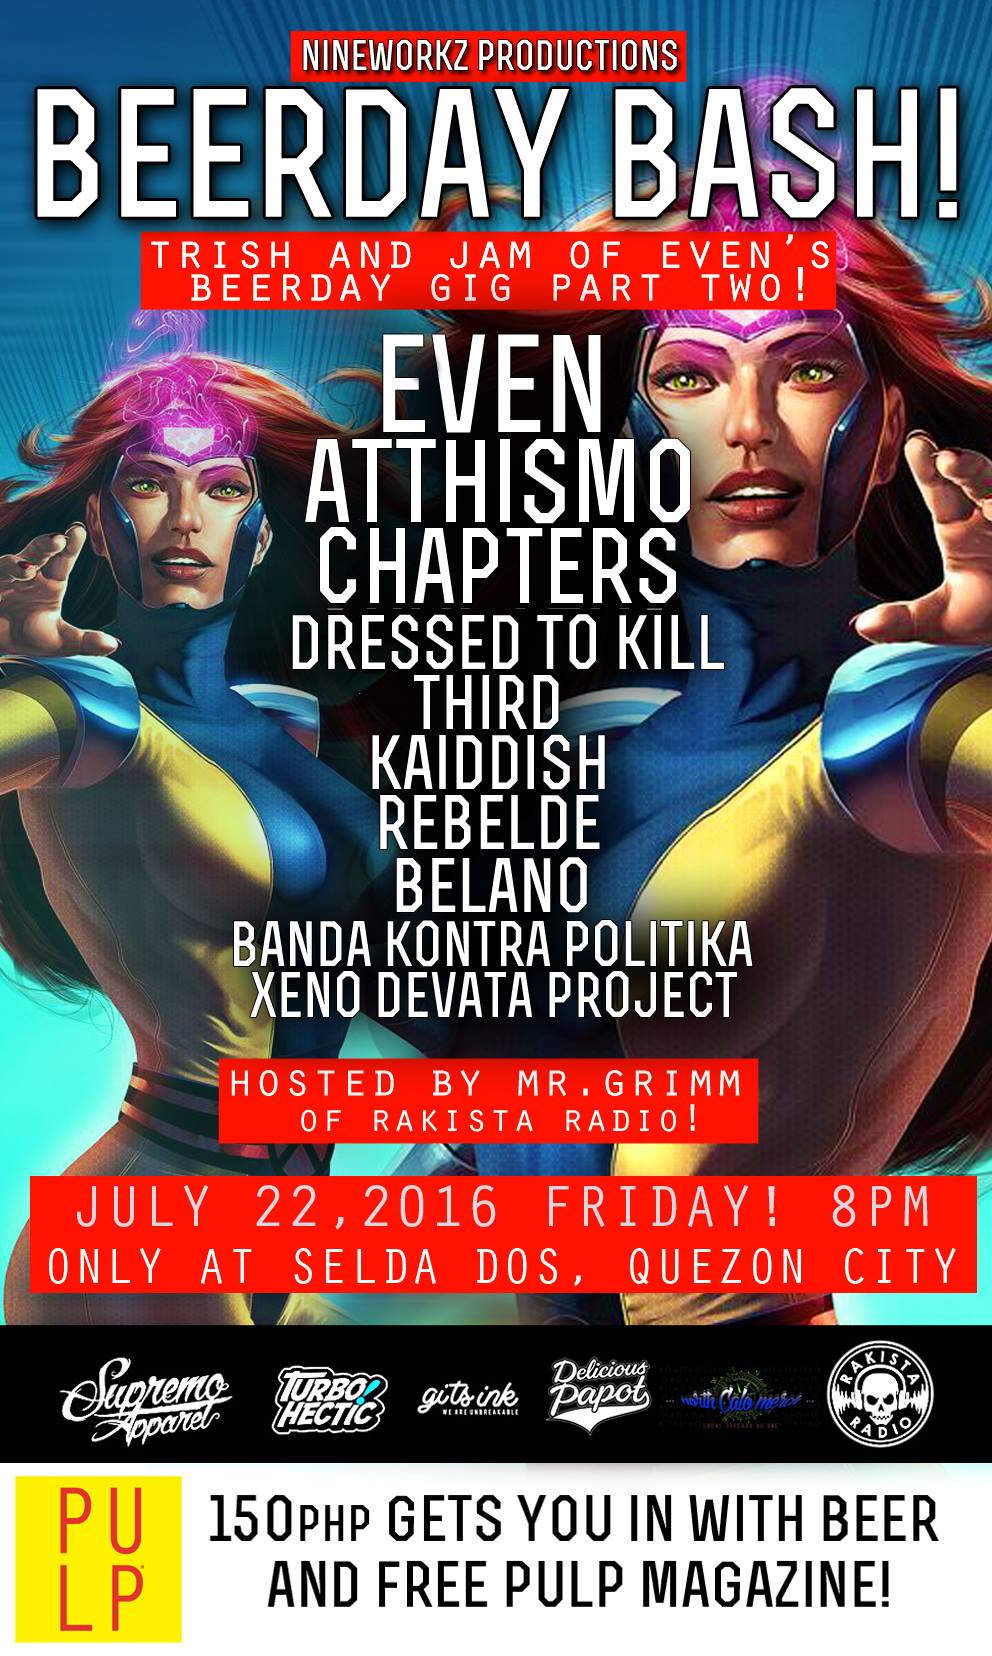 Nineworkz Productions Like This Page · July 4 · Edited · Nineworkz Productions BEERDAY BASH! Trish & Jam of EVEN's! PART 2 at SELDA DOS! Featuring performances from our super friends: ATTHISMO! Chapters! (Pampanga) Dressed to Kill PH! Kaiddish! Rebelde! Belanova! #Third! Bandakontrapolitika! and Xeno Devata Project! Hosted by Mr. Grimm of Rakista Radio! JULY 22, 2016 / FRIDAY / 8PM 150PHP gets you in with beer and PULP Magazine! Selda-Dos Music Bar, Quezon City Tell all your friends! Tara! #indieOrdie #nineworkz Supremo Apparel TURBOHECTIC GitS InK Delicious Papot Clothing North Calo Merch RAKISTA